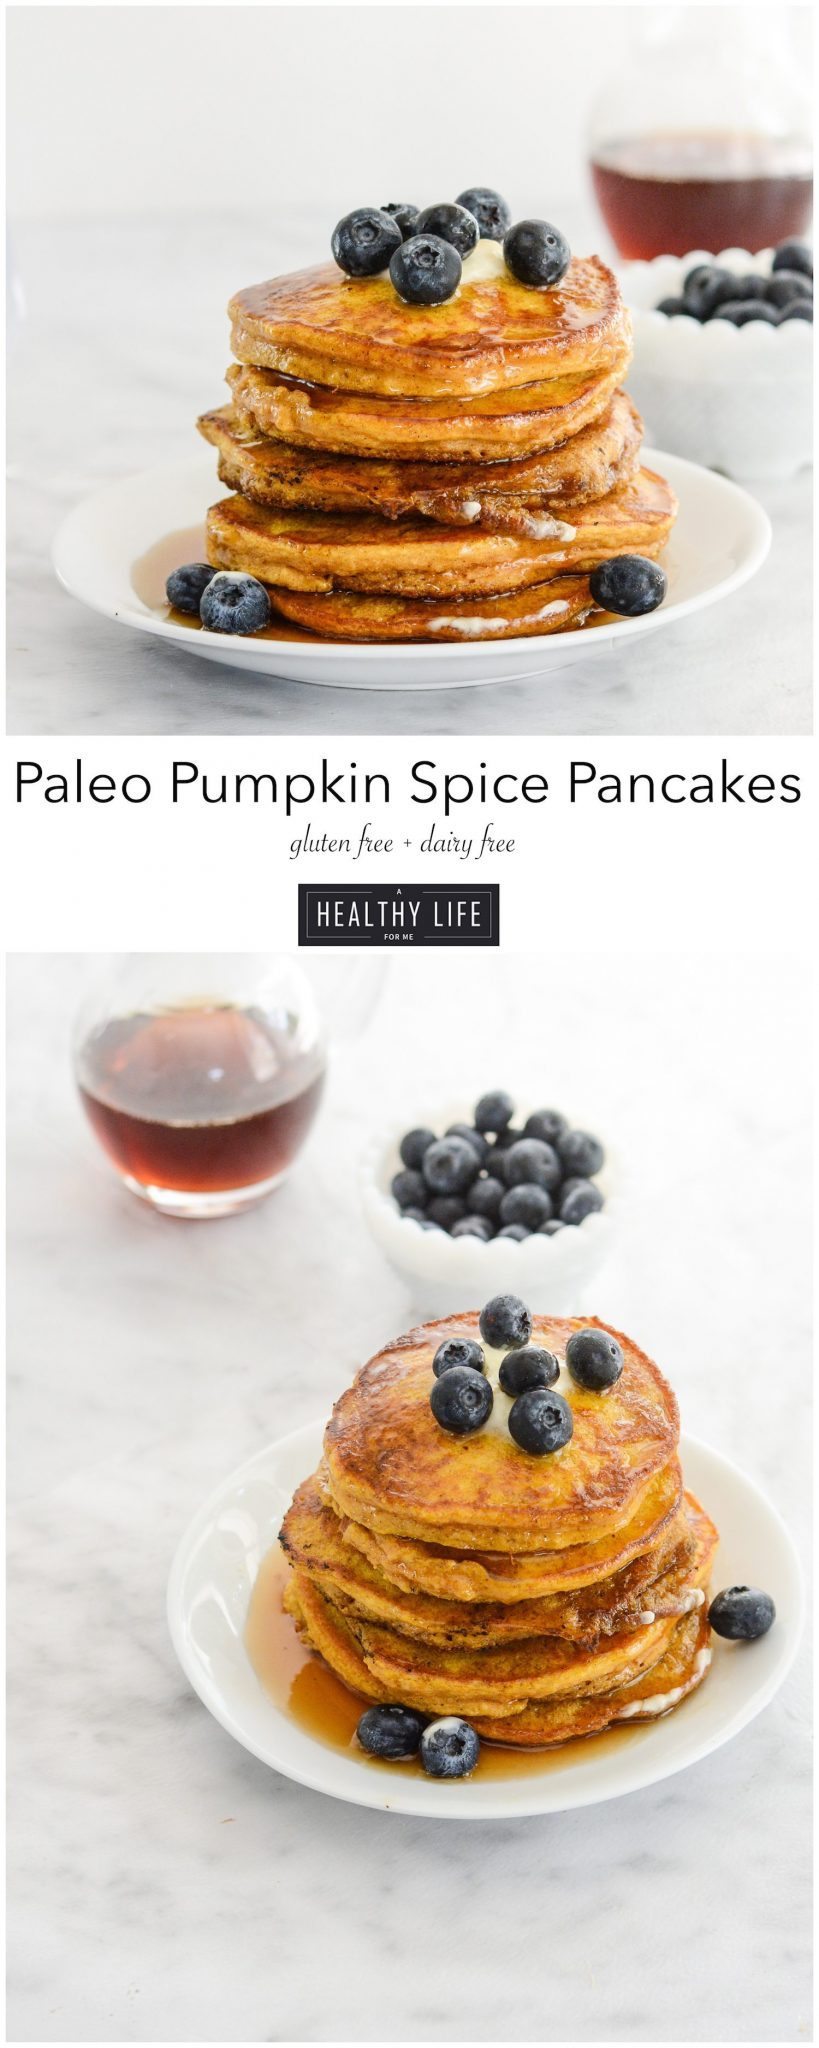 Paleo Pumpkin Spice Pancakes are the perfect stack of breakfast cakes with a taste of fall | ahealthylifeforme.com